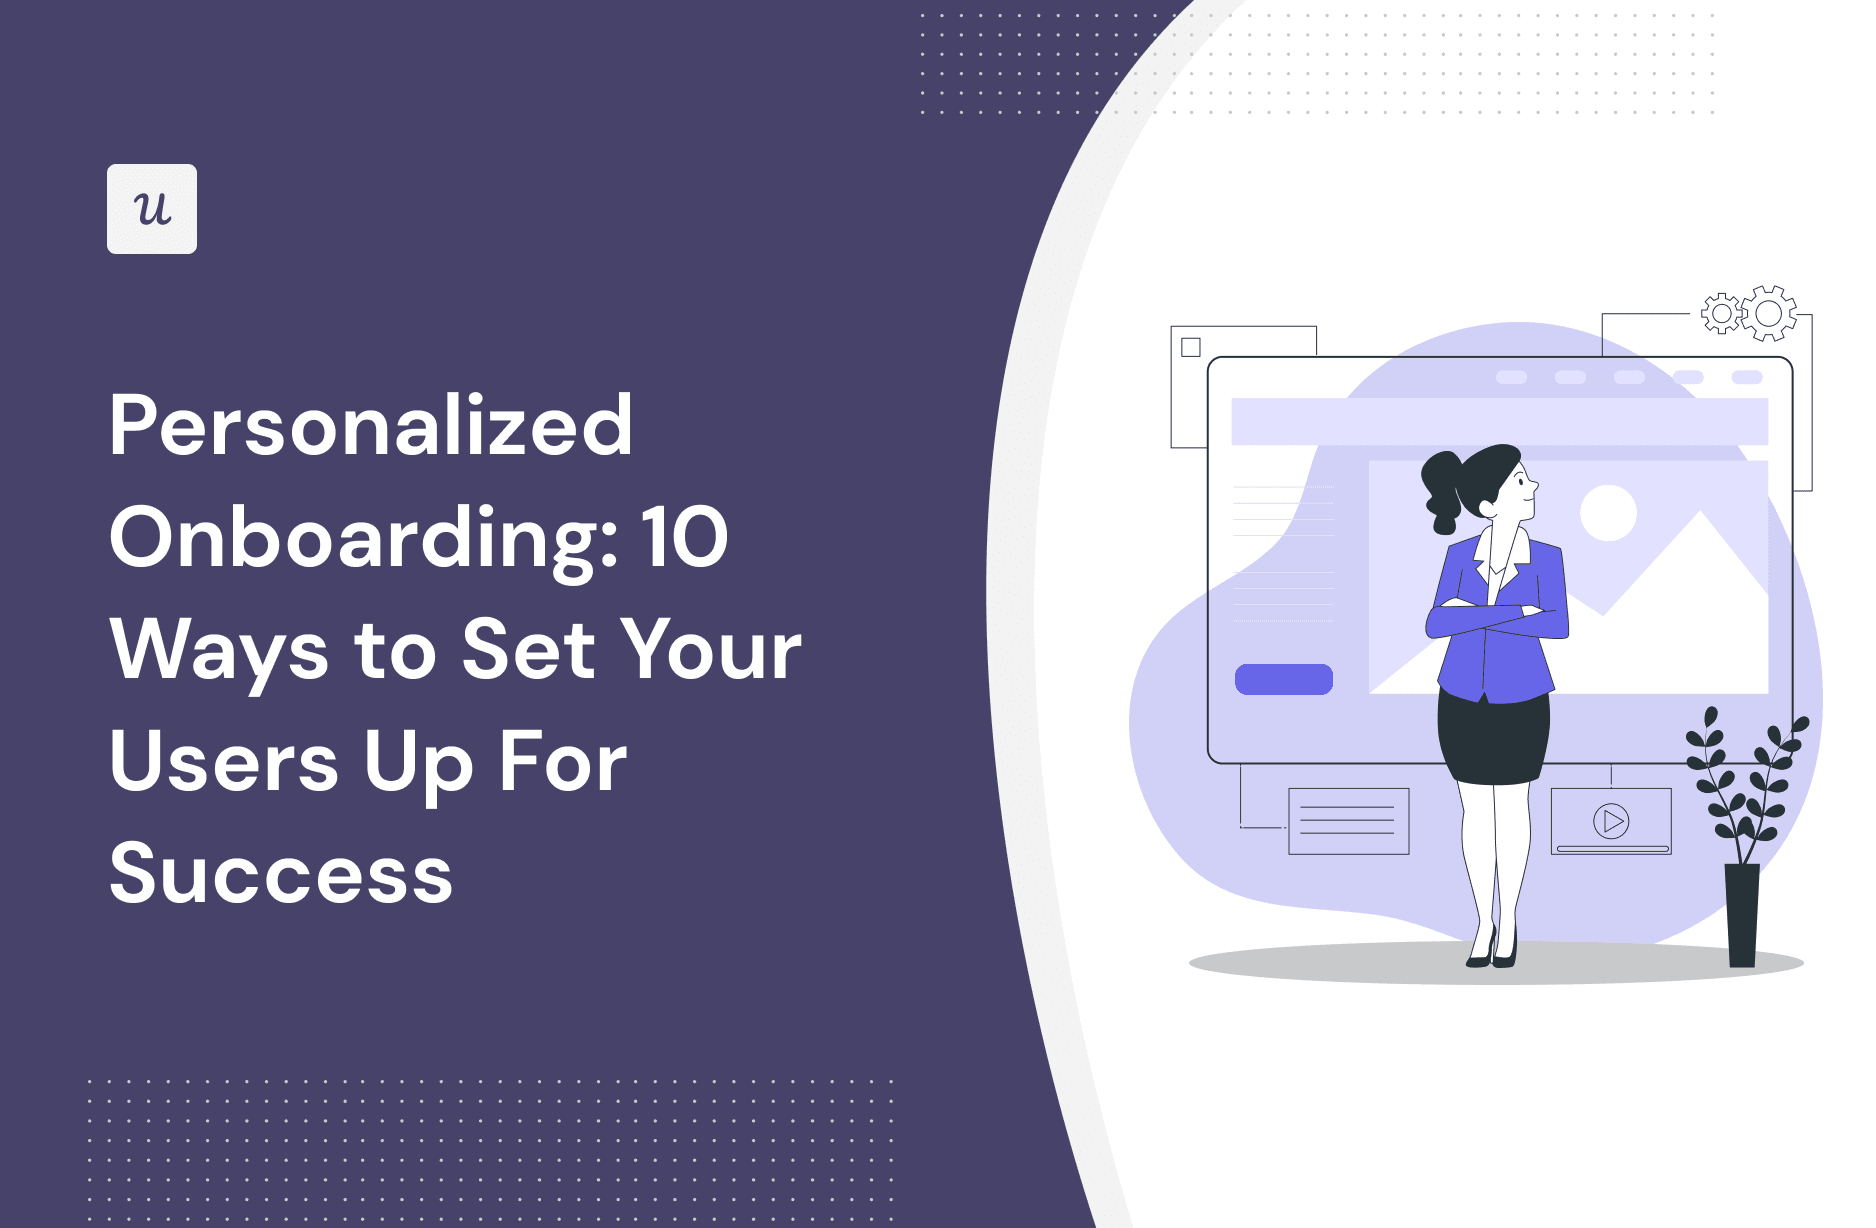 Personalized Onboarding: 10 Ways to Set Your Users Up For Success cover